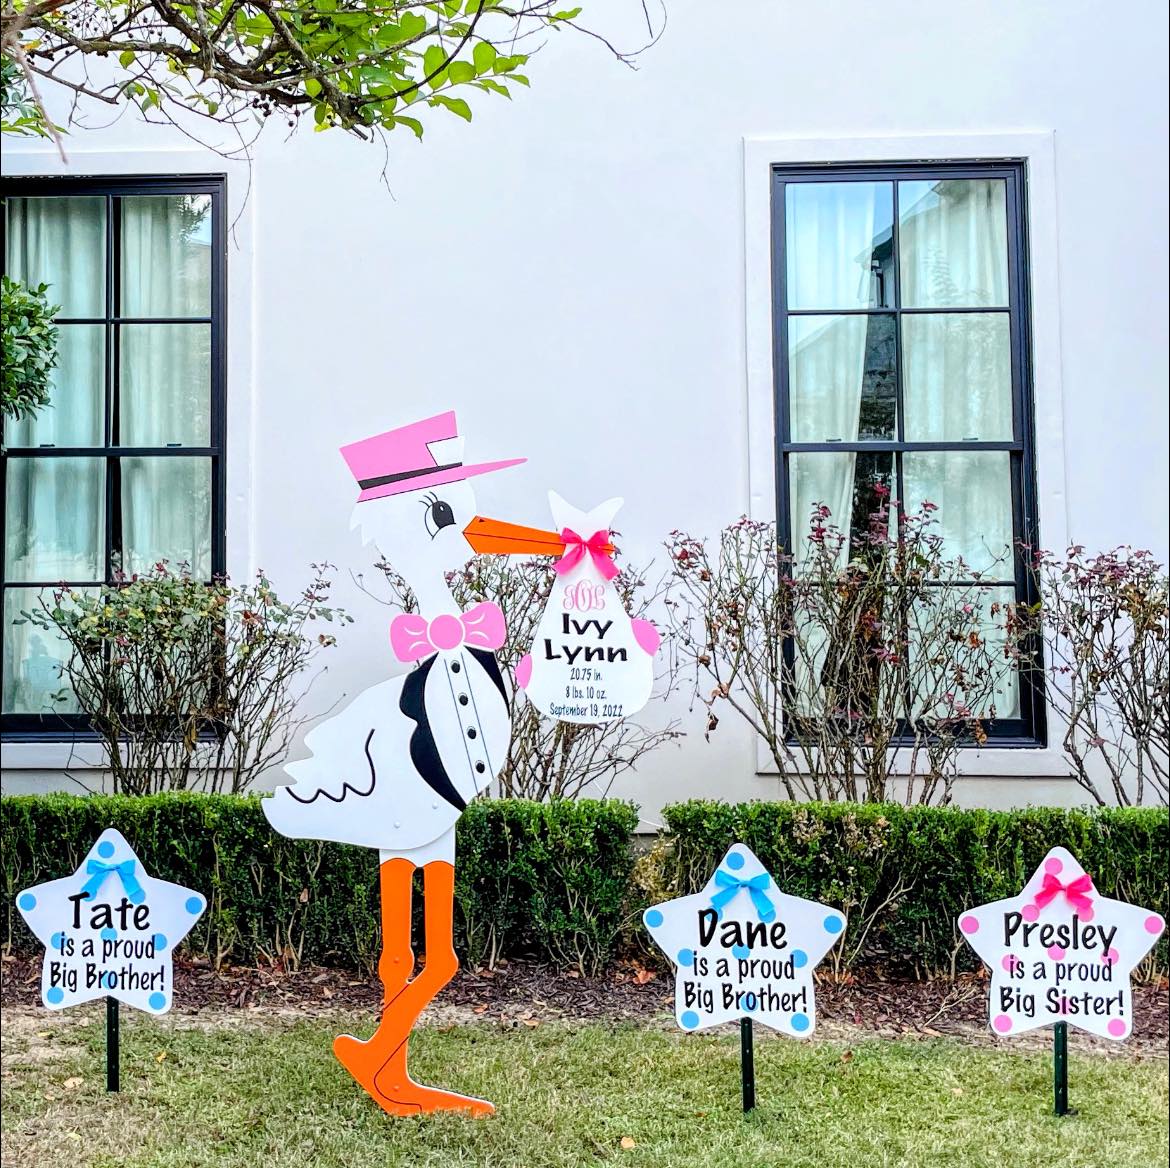 Pink Stork - Dogwood Storks - Stork Sign Rental, Knoxville, TN and surrounding areas